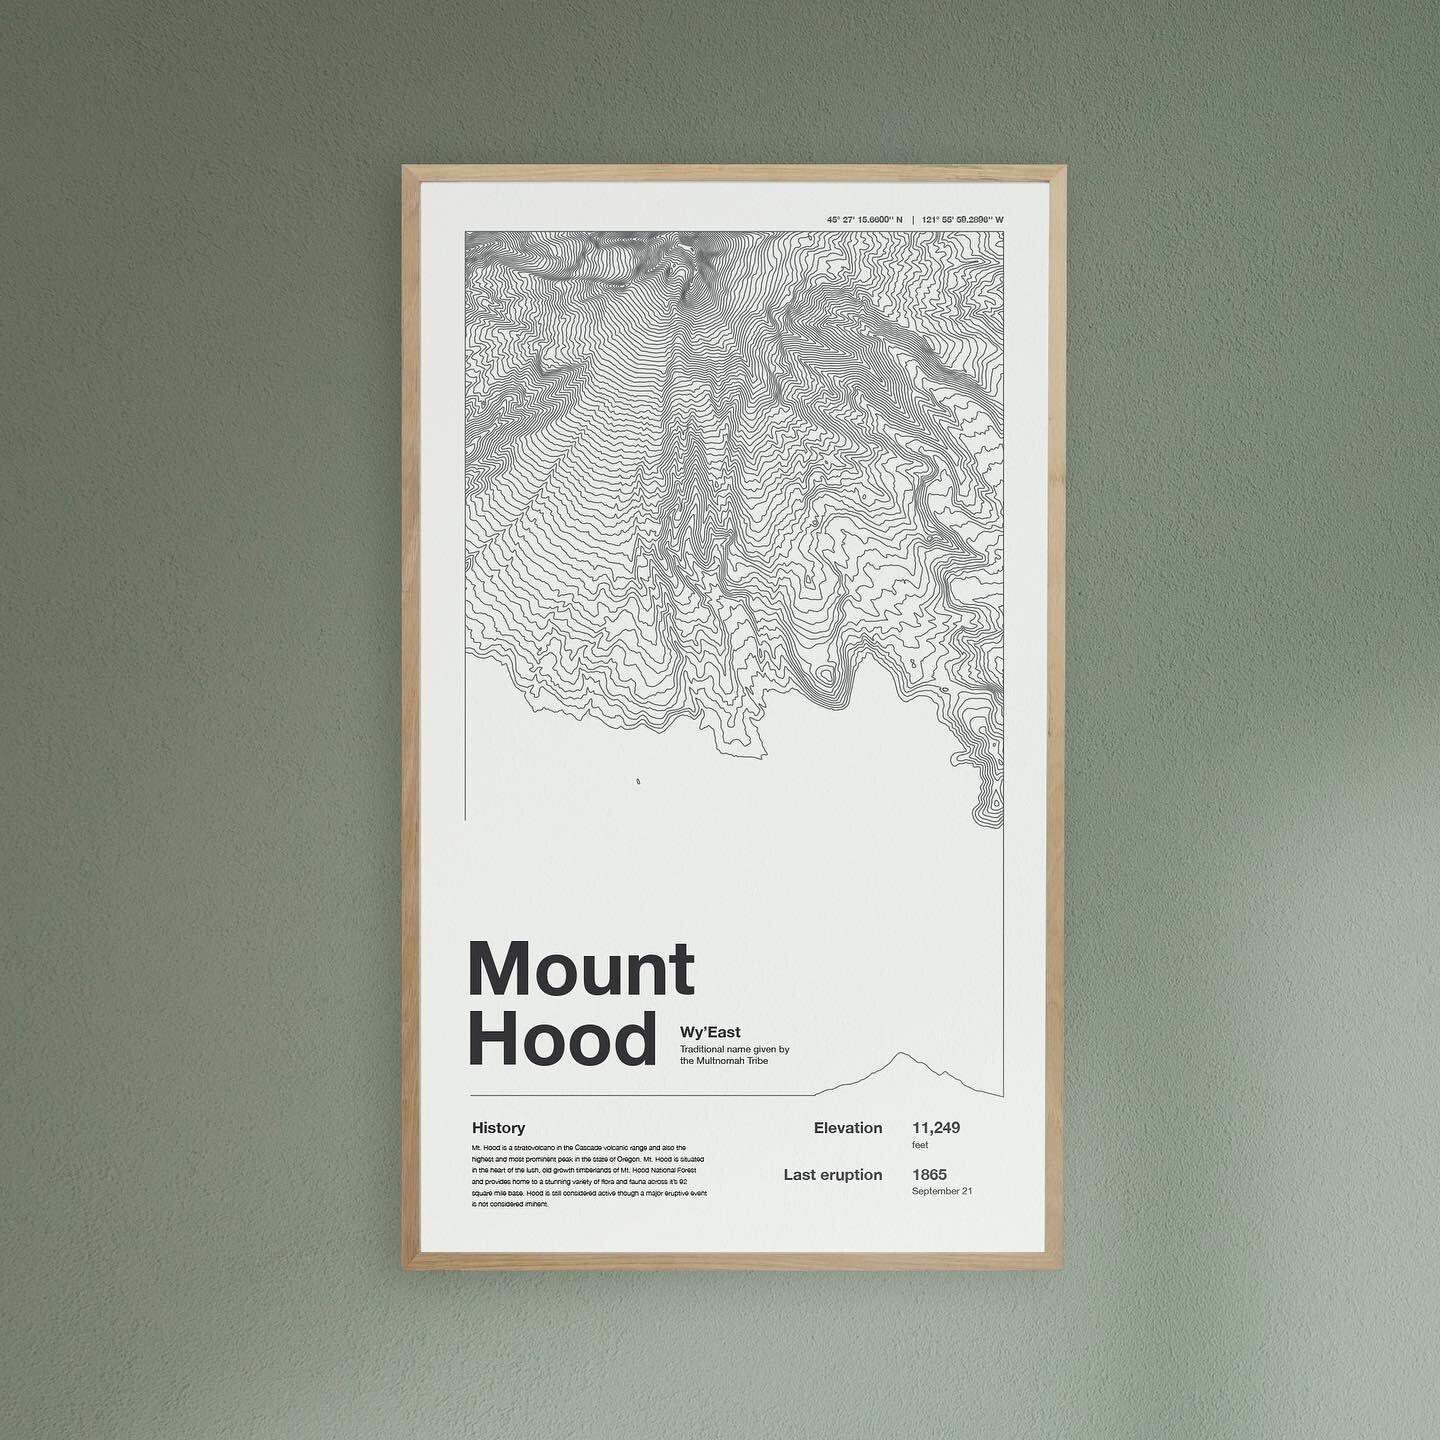 These babies are up on our shop ready for purchase! 🥳

We&rsquo;ve got the start of our mountain series posters waiting for you with three of our favs- Mount Hood, Mount Rainier, and *of course* Mount St. Helens (for those of you who don&rsquo;t kno